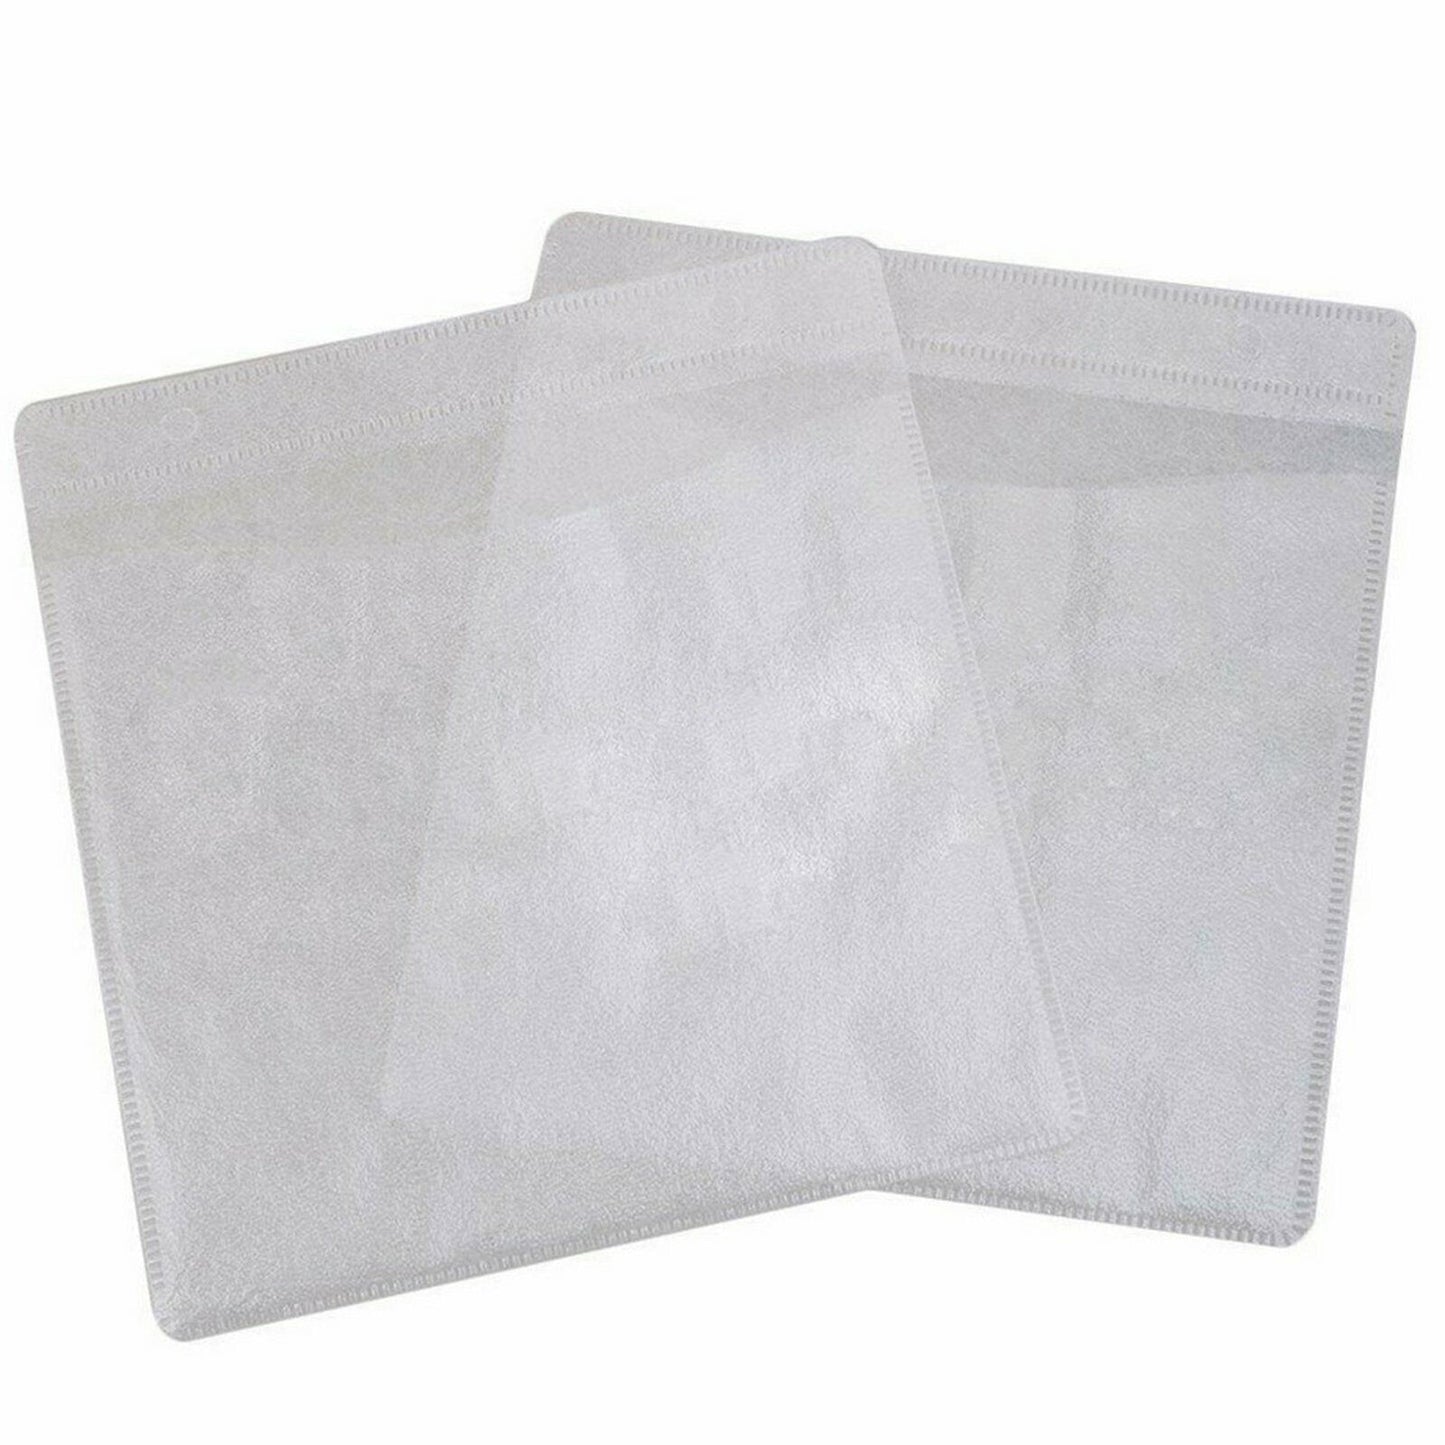 100pcs Premium White CD DVD Double Sided Soft Plastic Sleeves Holds 2 discs